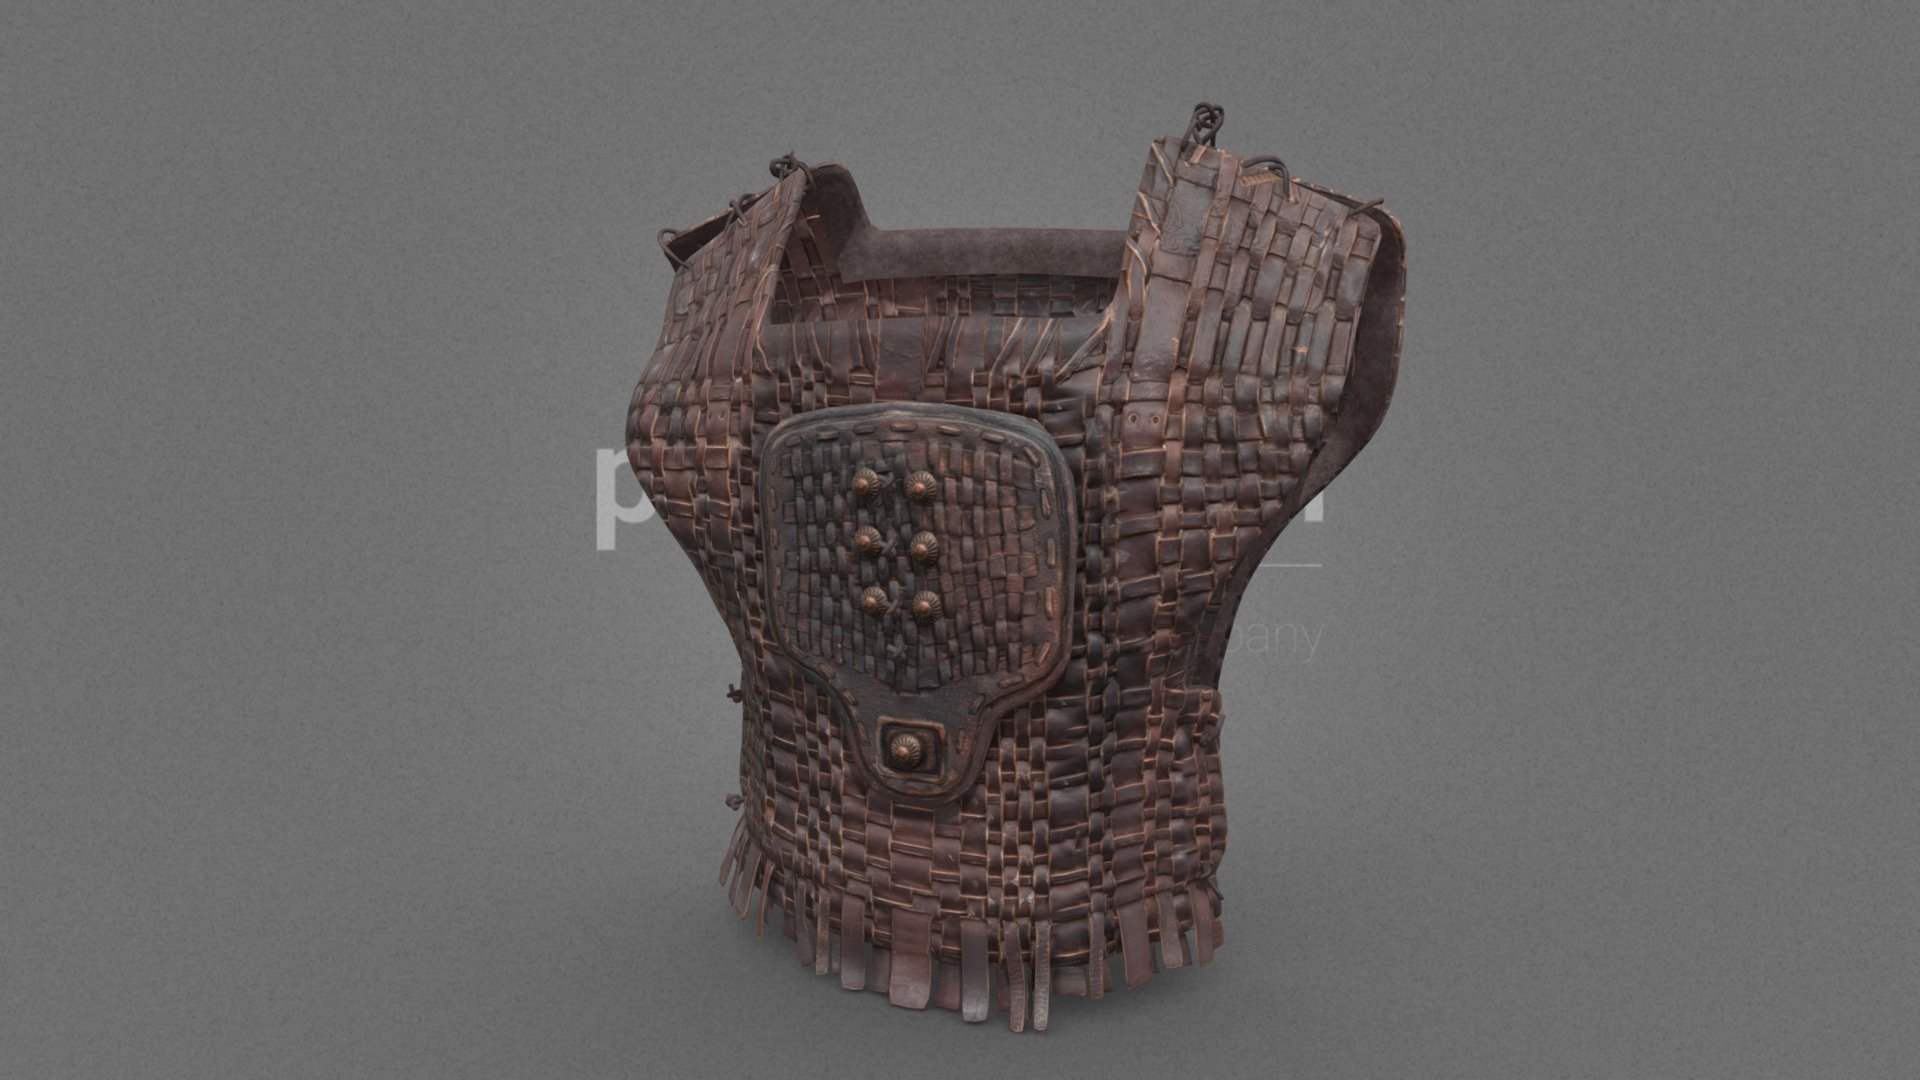 Leather cuirass armor

We are Peris Digital, and we make RAW meshes (Photogrammetry) and Digital Doubles.

This is a RAW mesh, taken by our photogrammetry team in our RIG with 144 Sony Alpha cameras.
Check our web, make your selection and contact us to get your costume scanned or talk with us to take a Demo RAW mesh to download it.

Contact: info@peris.costumes - Leather Cuirass 17 - 3D model by Peris Digital (@perisdigital) 3d model